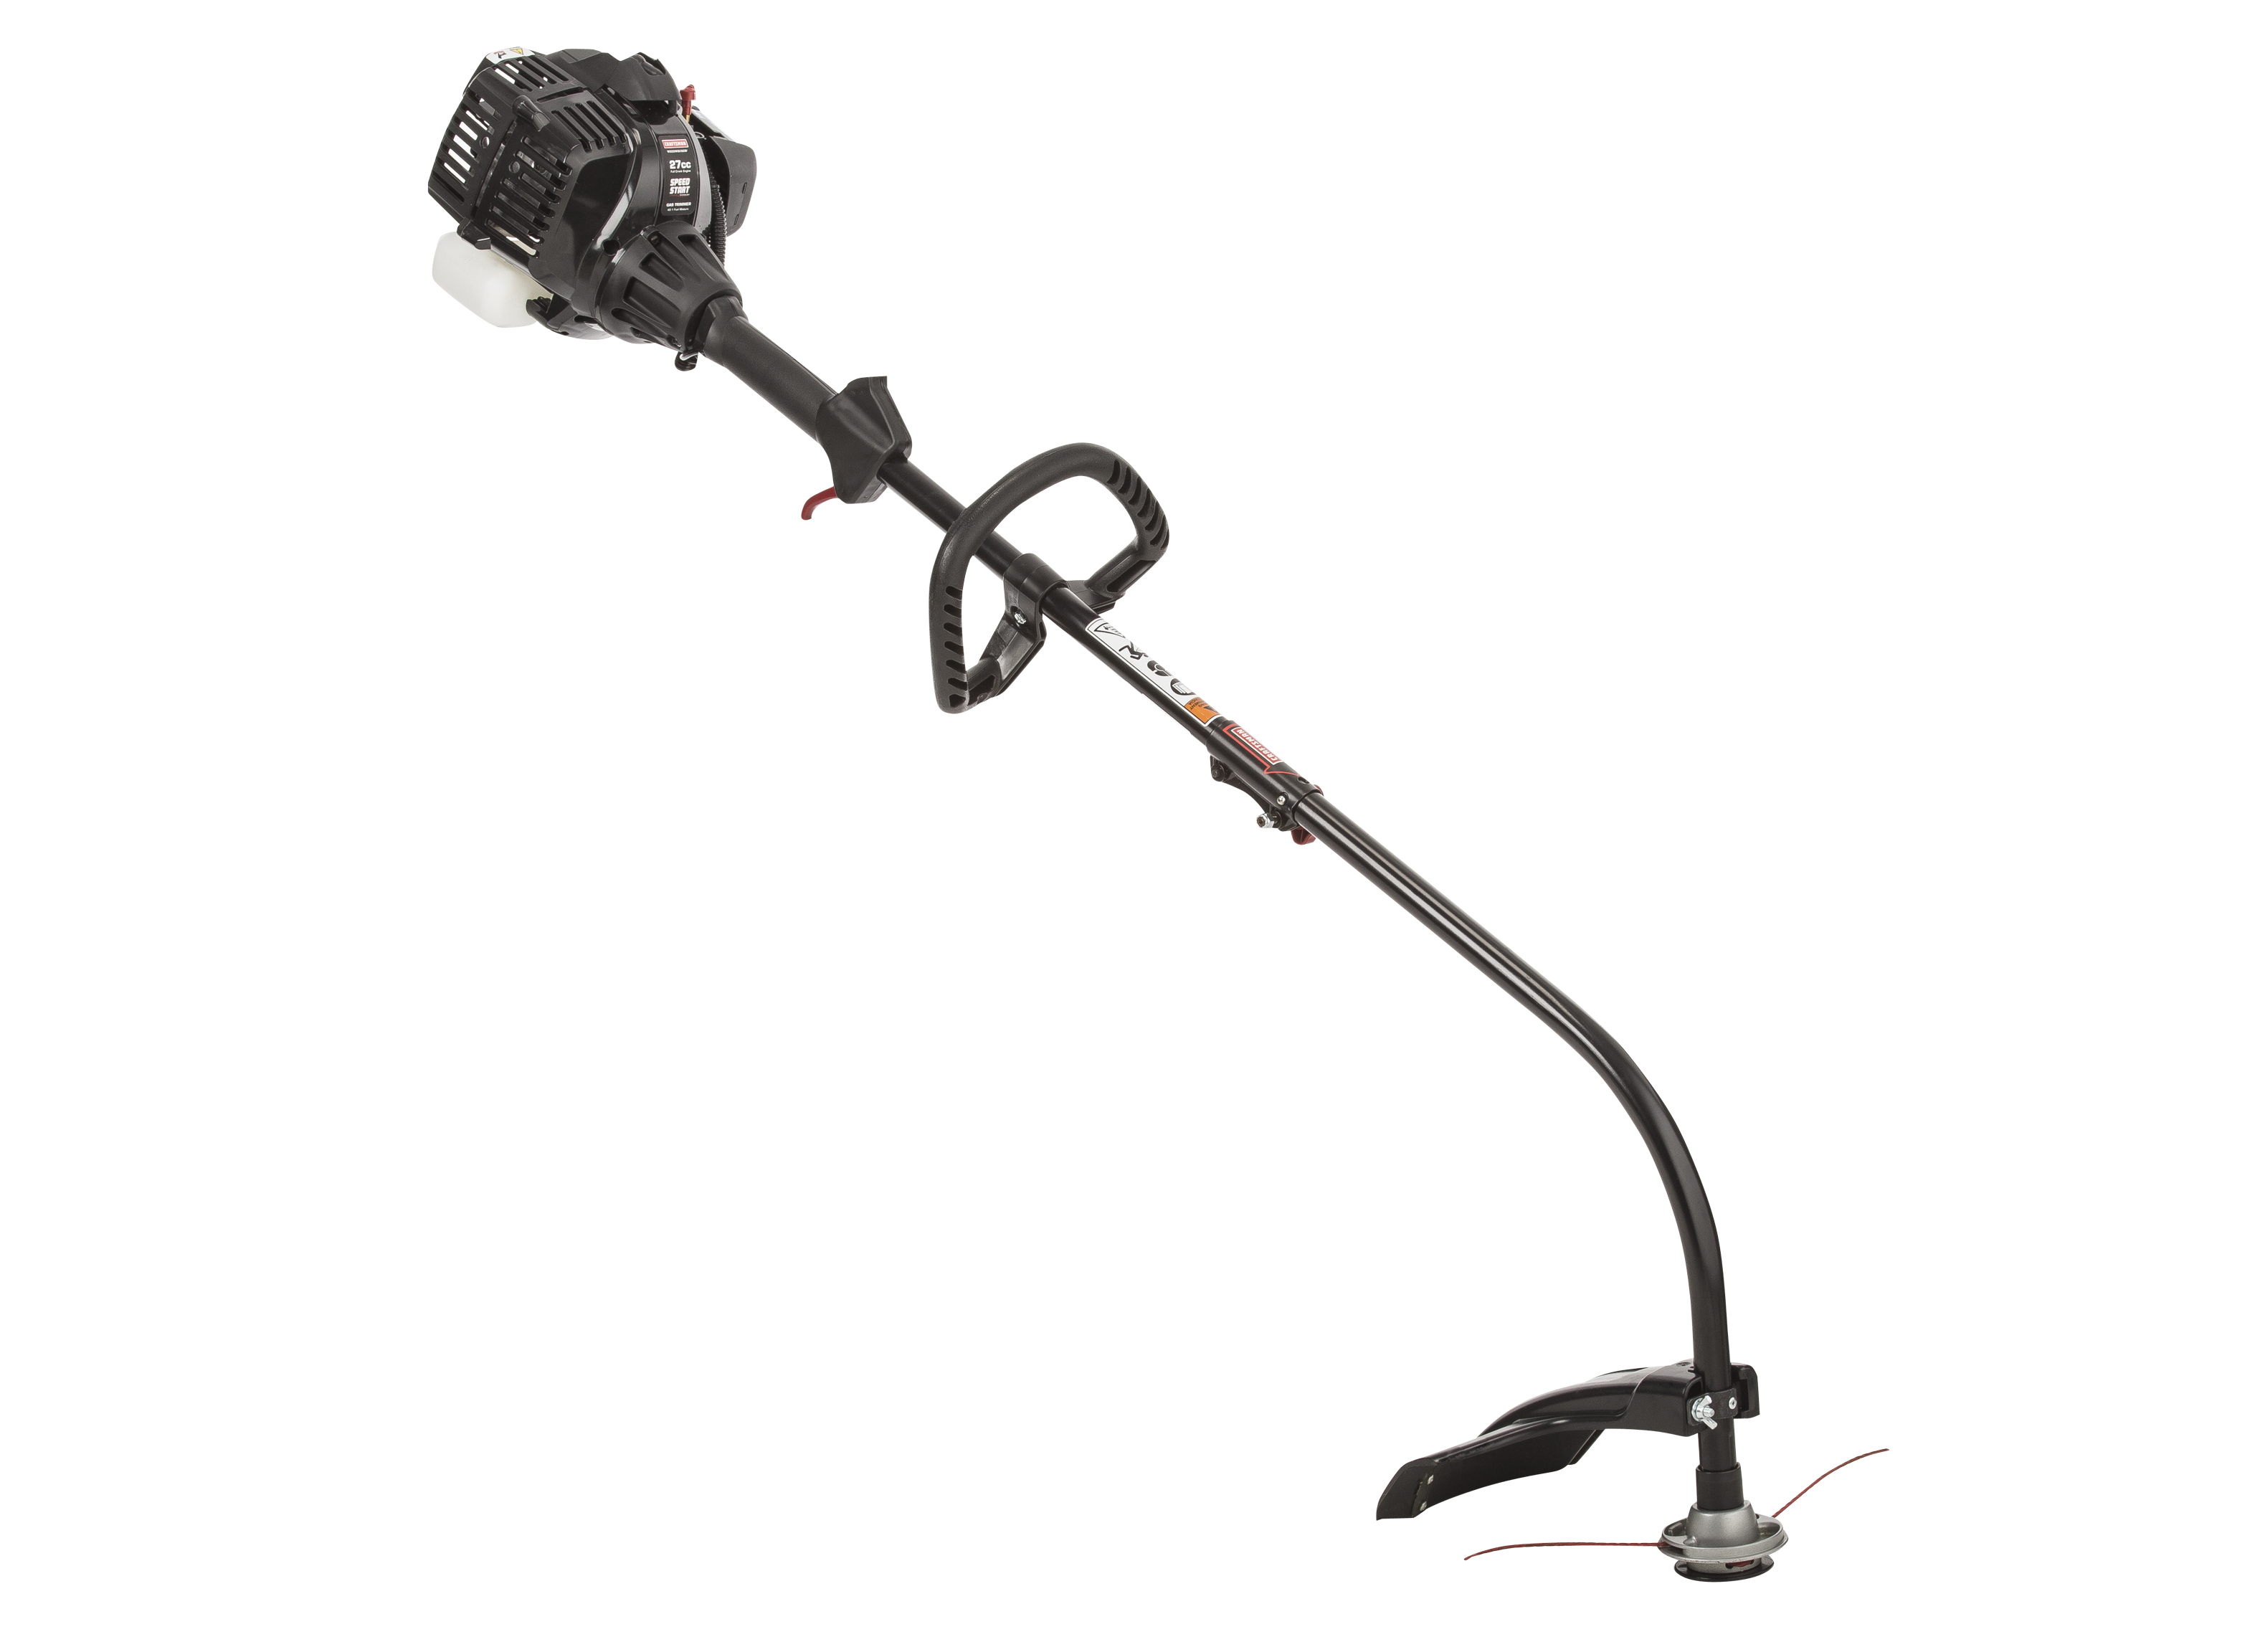 Craftsman String Trimmer Consumer Reports